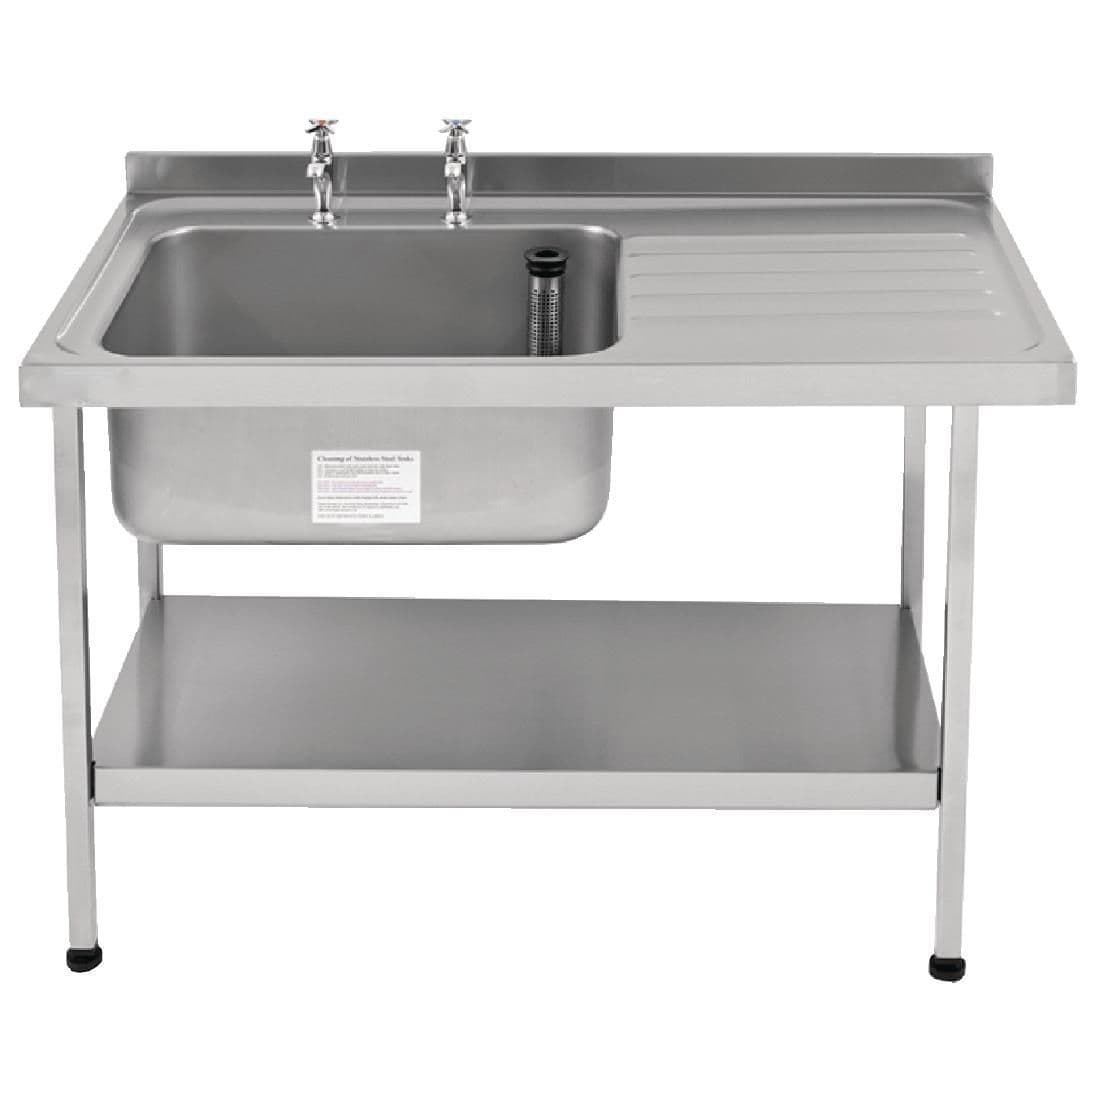 Franke Sissons Self Assembly Stainless Steel Sink Right Hand Drainer 1200x650mm JD Catering Equipment Solutions Ltd